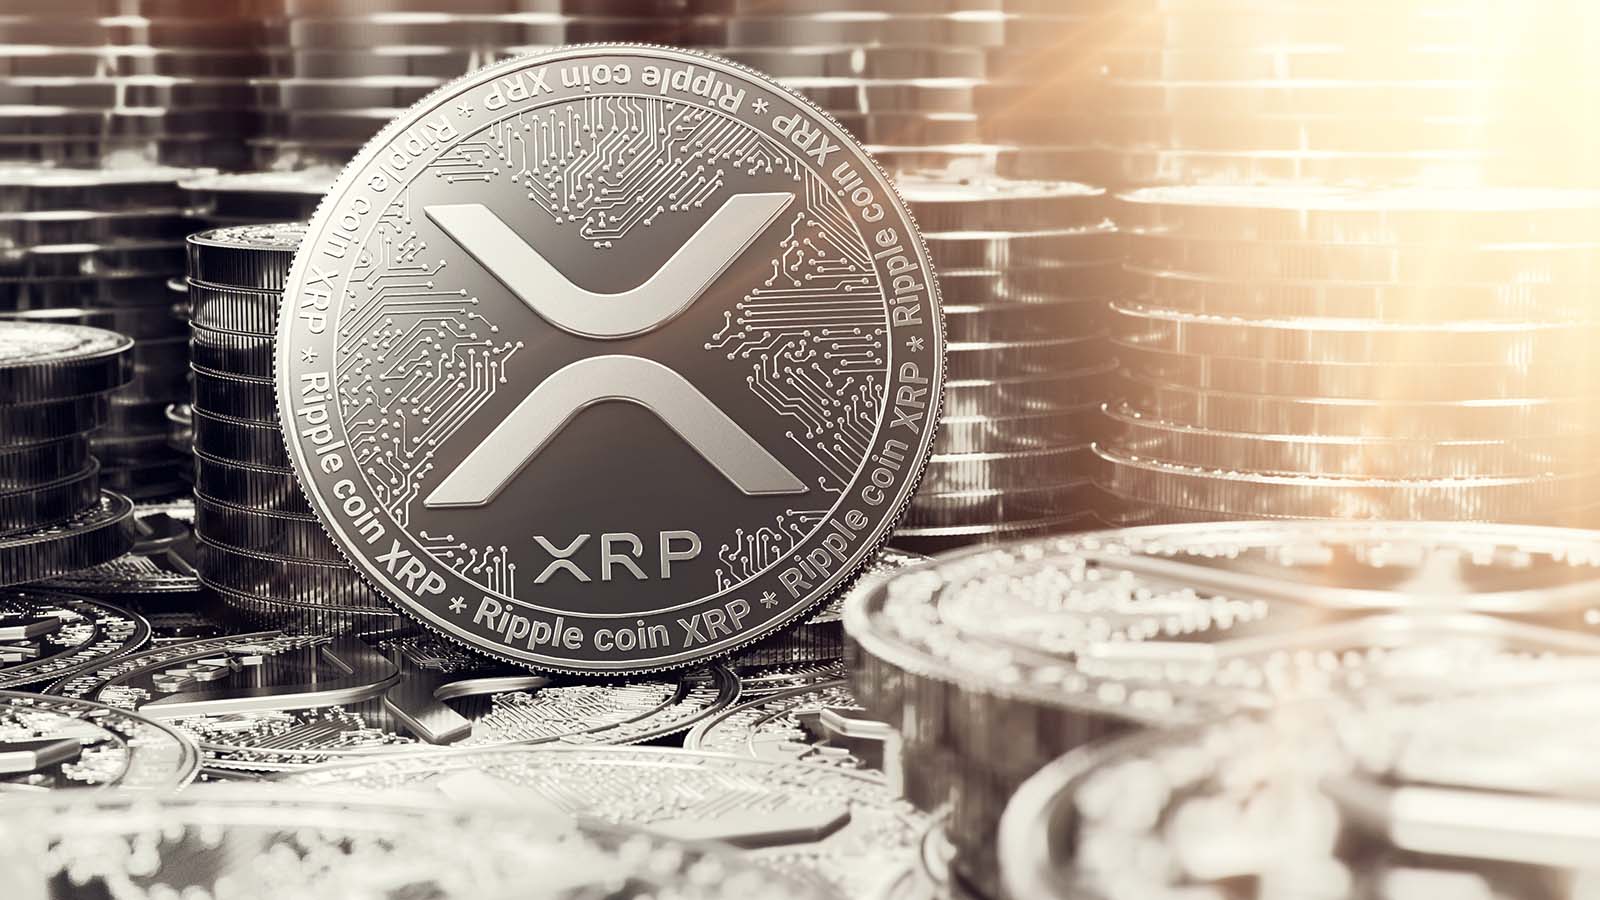 A concept token for XRP with stacks of tokens in the background. XRP price predictions.